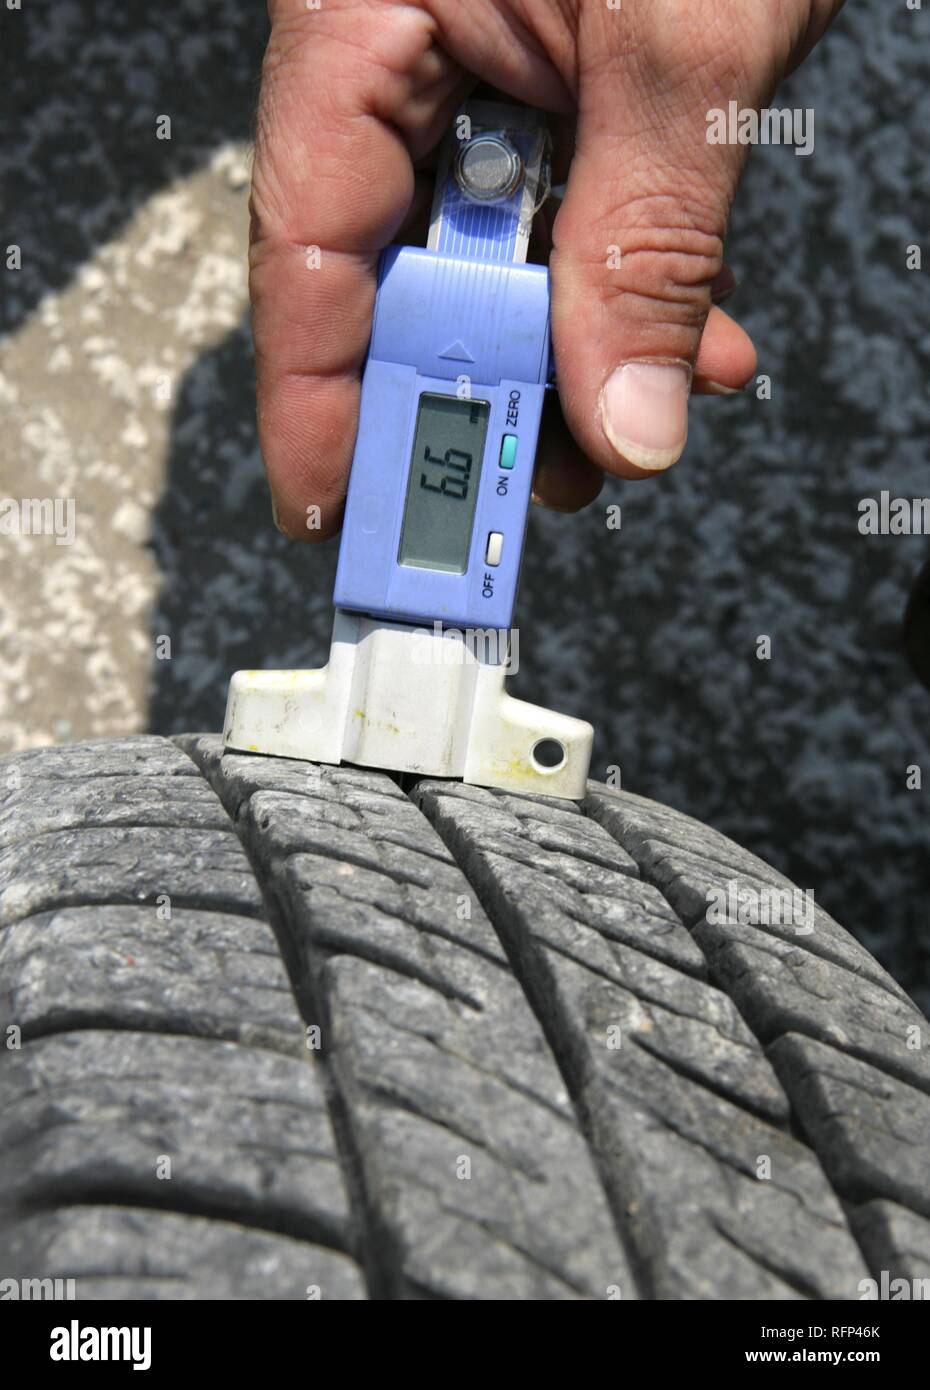 Measuring instrument for tread depth of tires Stock Photo